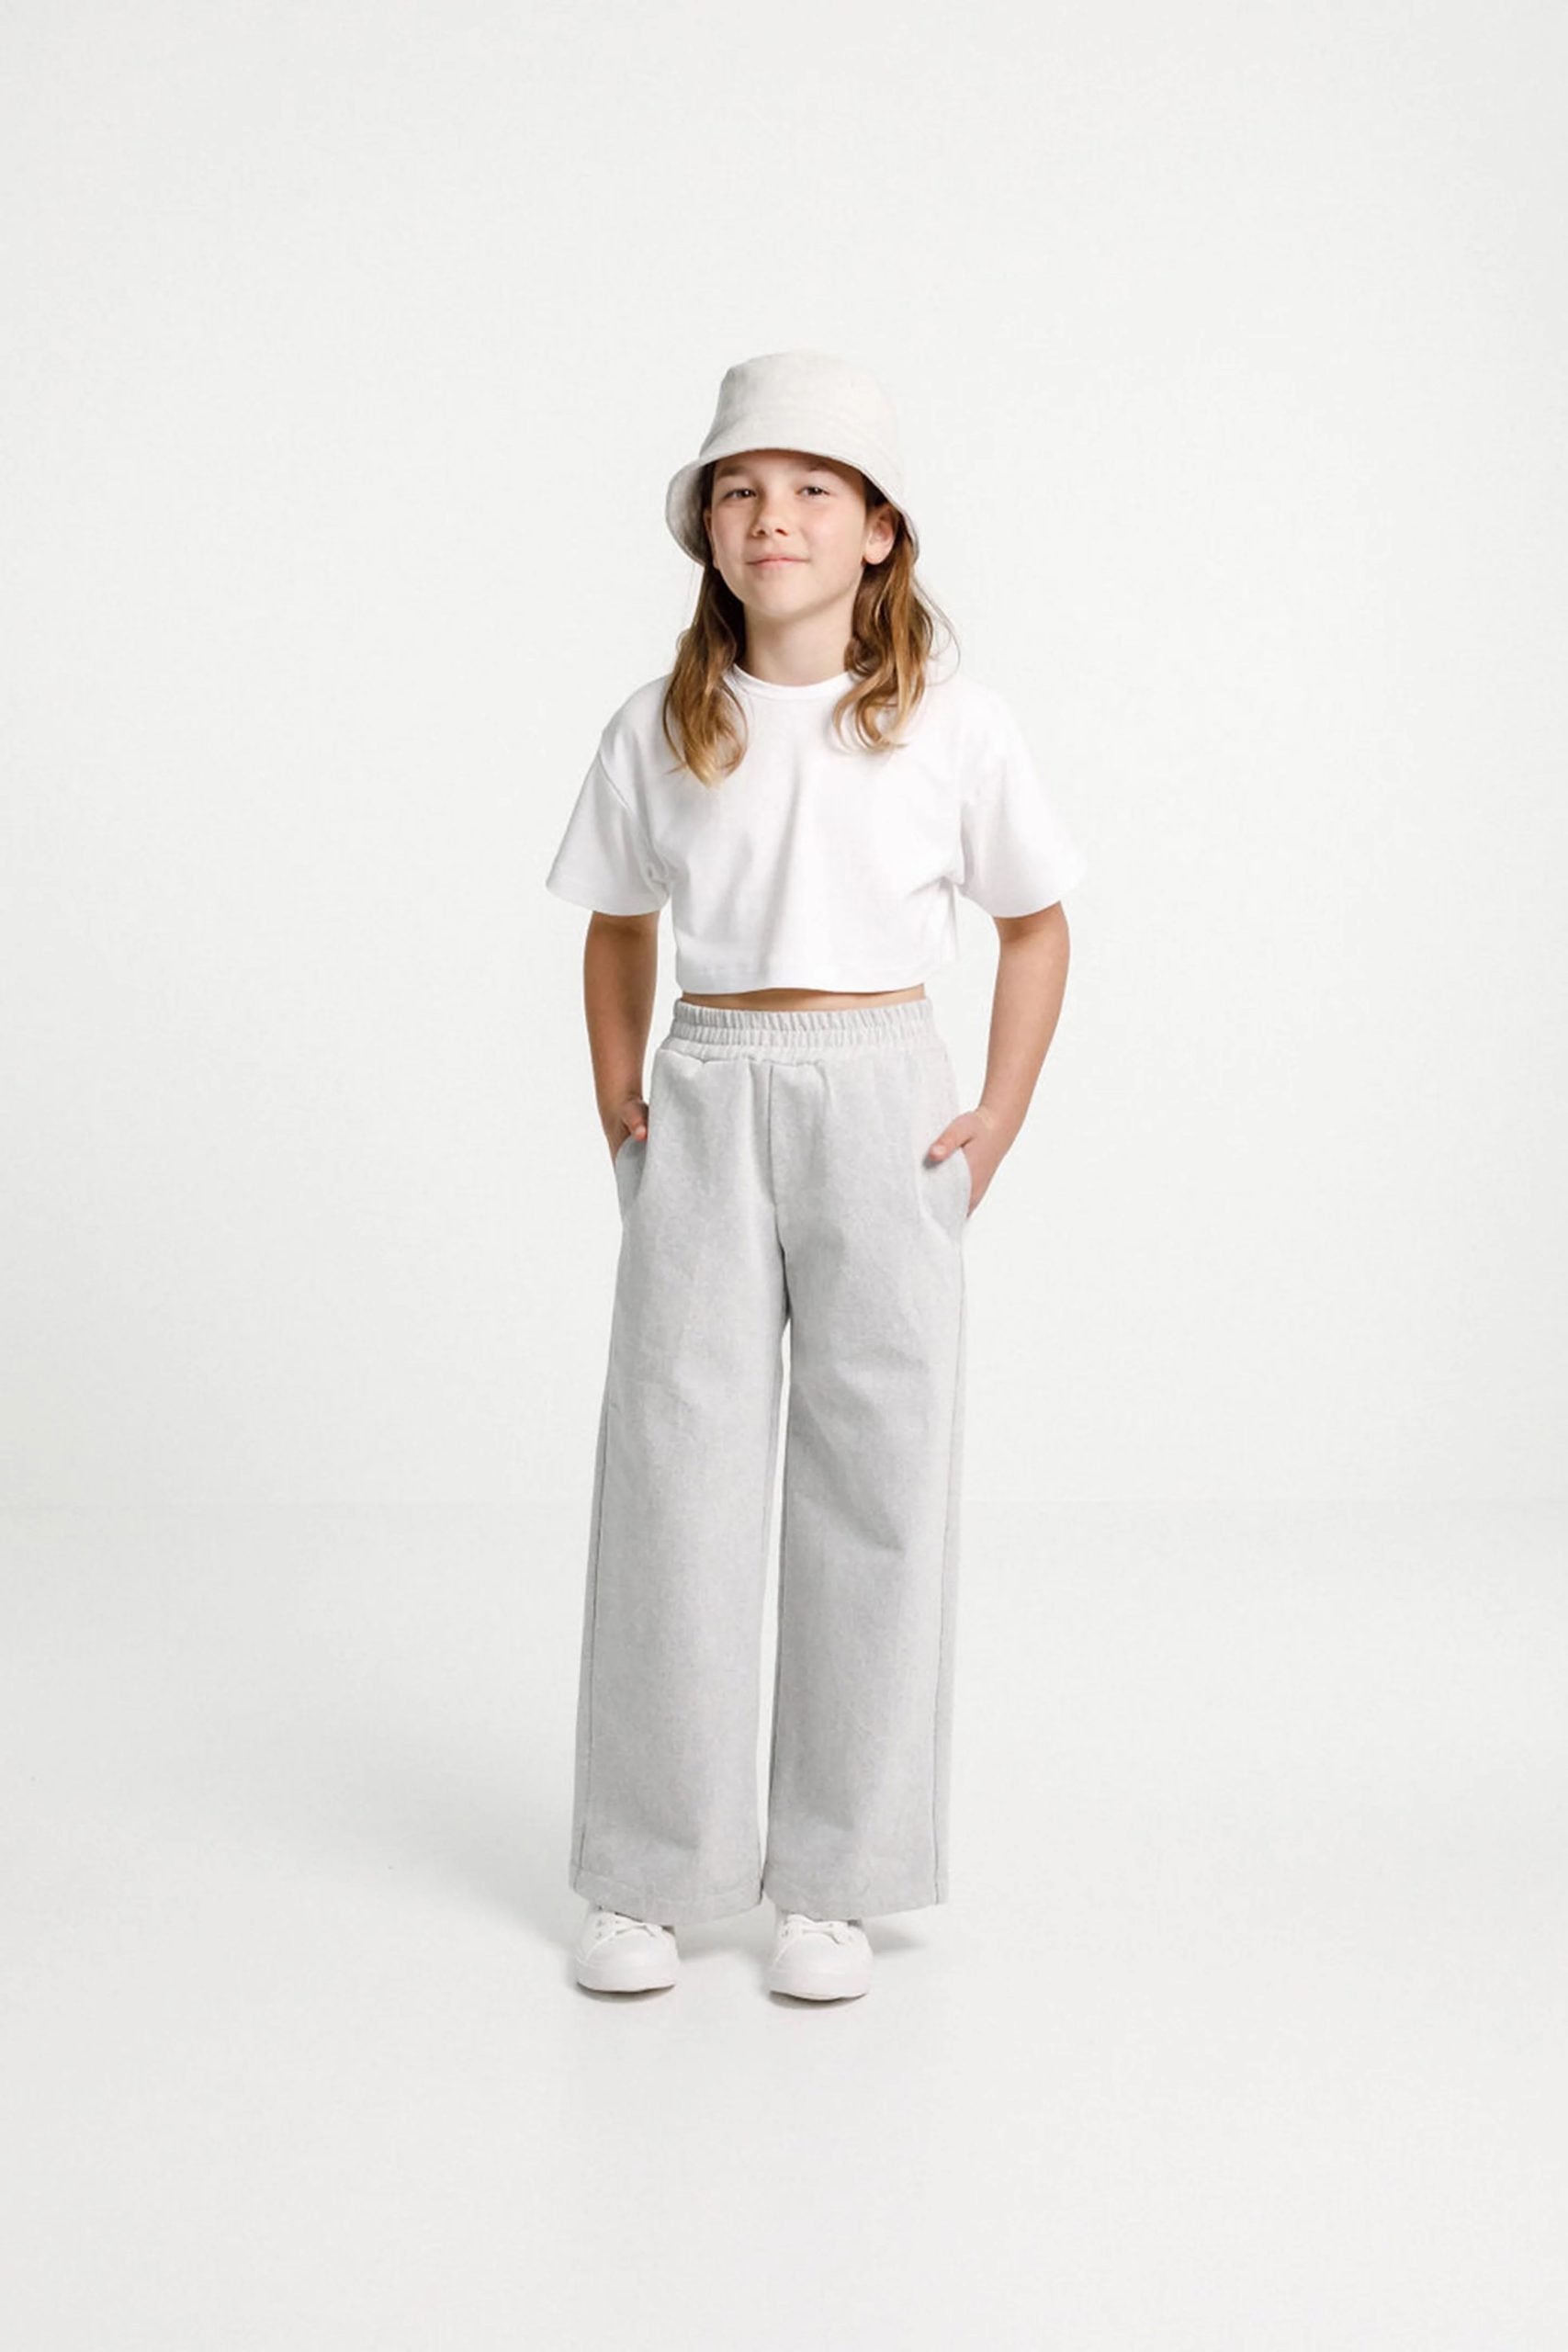 Child wearing the Child/Teen Tula Pants sewing pattern from Papercut Patterns on The Fold Line. A trouser pattern made in light to mid-weight woven or knit fabrics, linen, cotton, sweatshirting and blends fabrics, featuring an elasticated waistband, side pockets, ankle cuffs and wide leg fit.